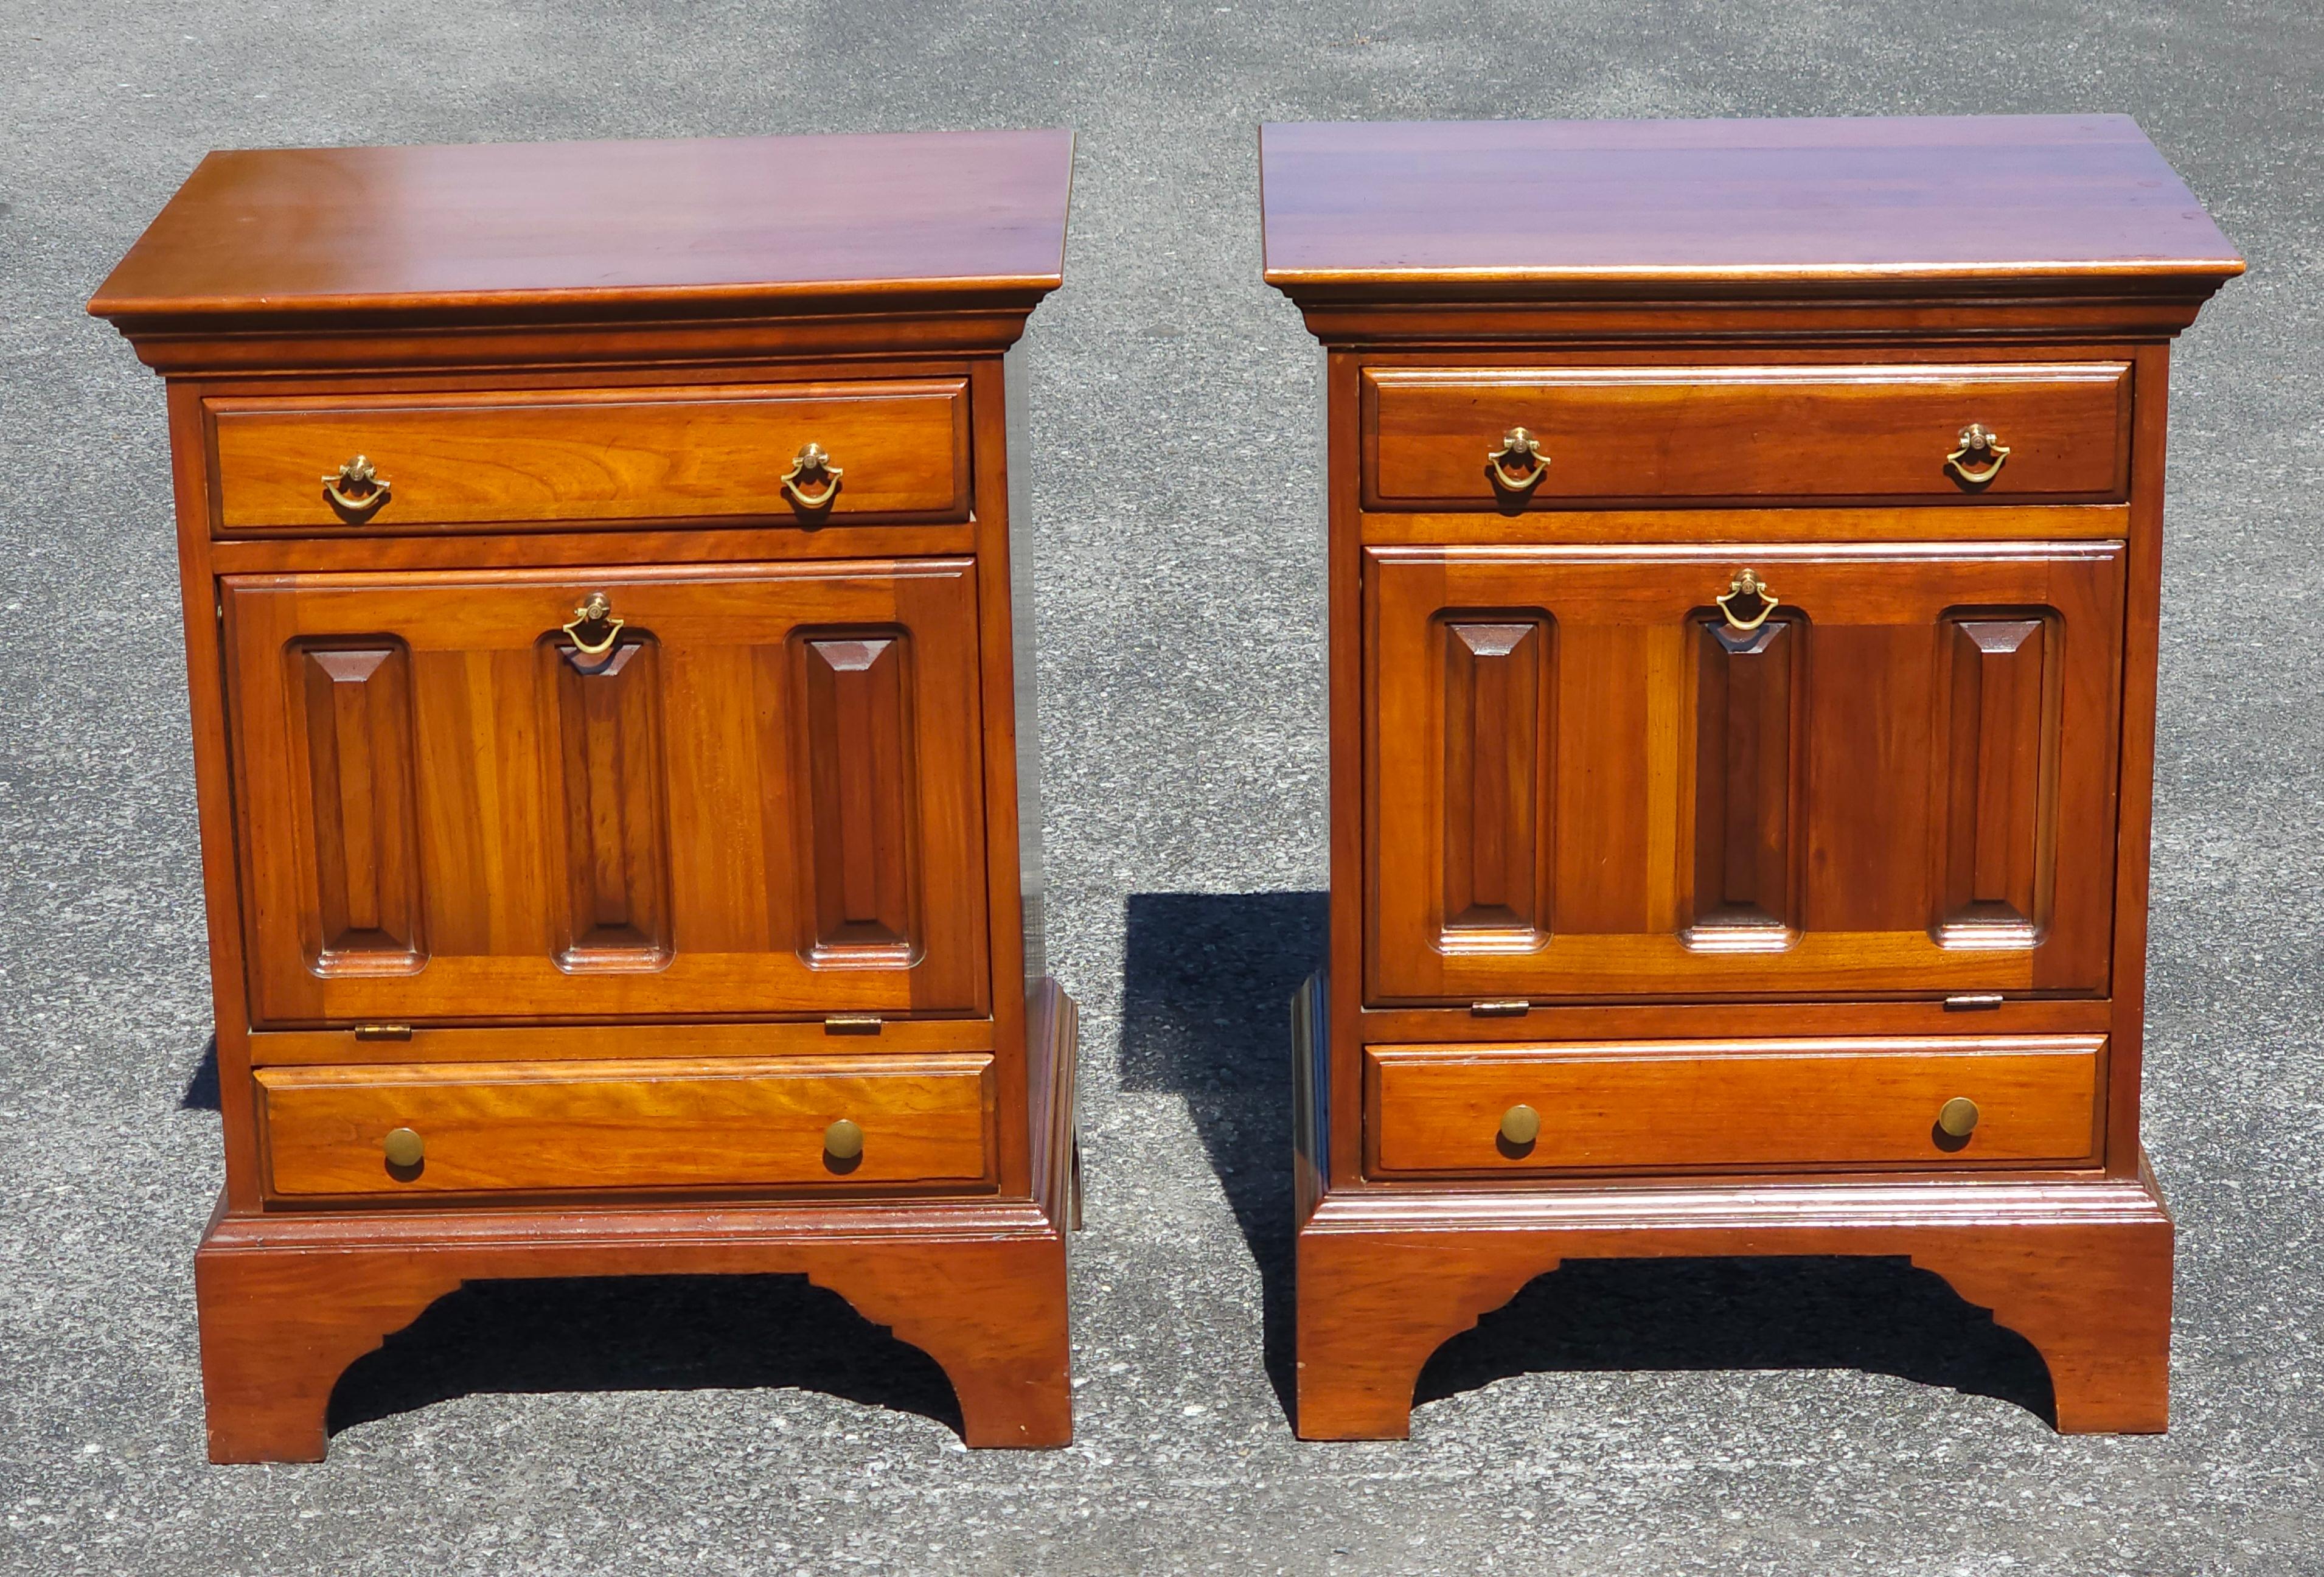 20th Century David Cabinet Cherry 2-Drawer a Abattant Door Bedside Cabinets Pair For Sale 3